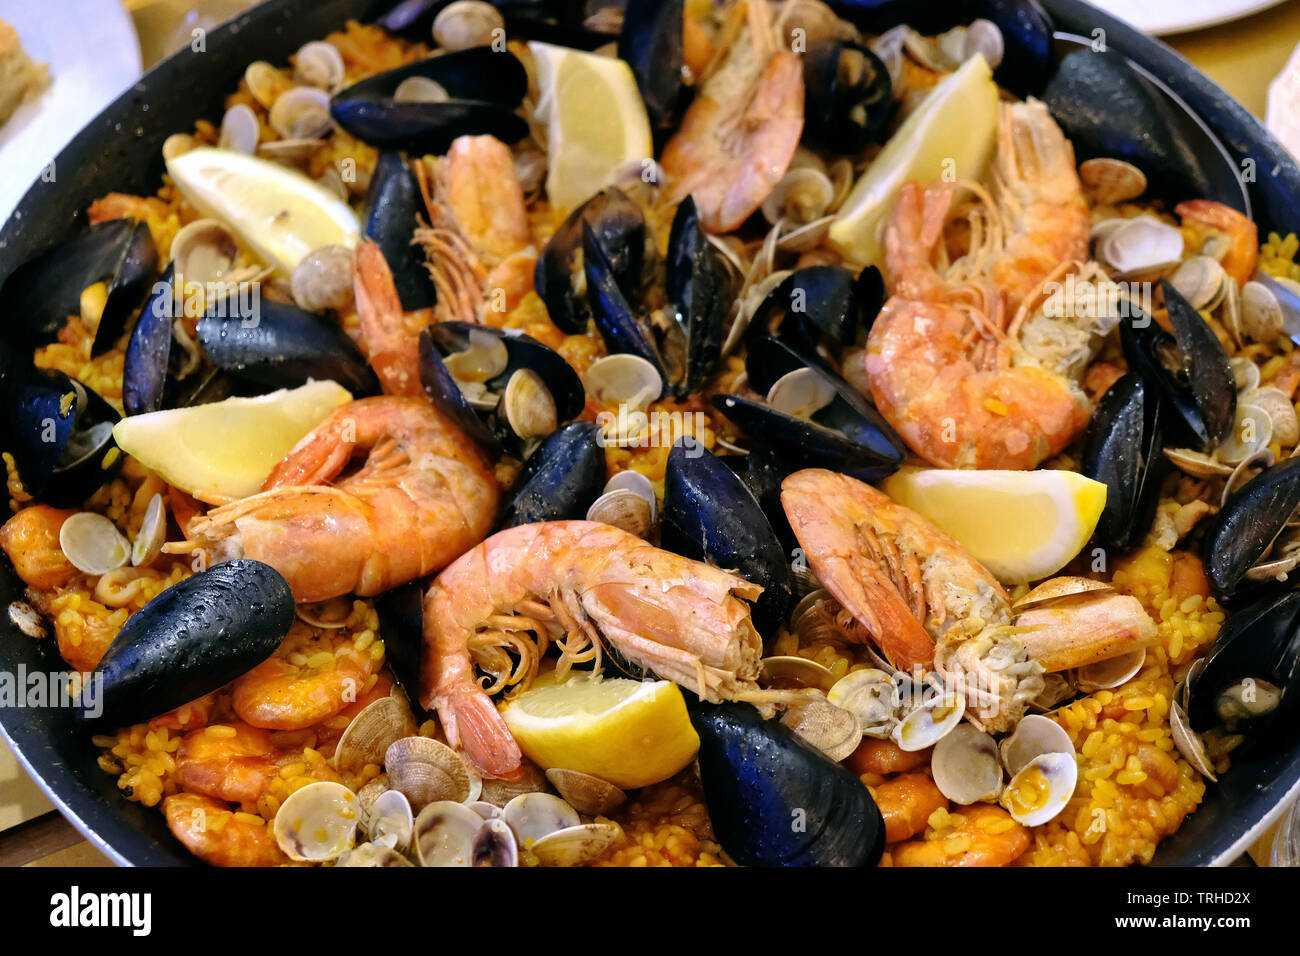 Paella pan with seafood in a restaurant in the coastal town of Fano at night, Marche region, Italy. Stock Photo